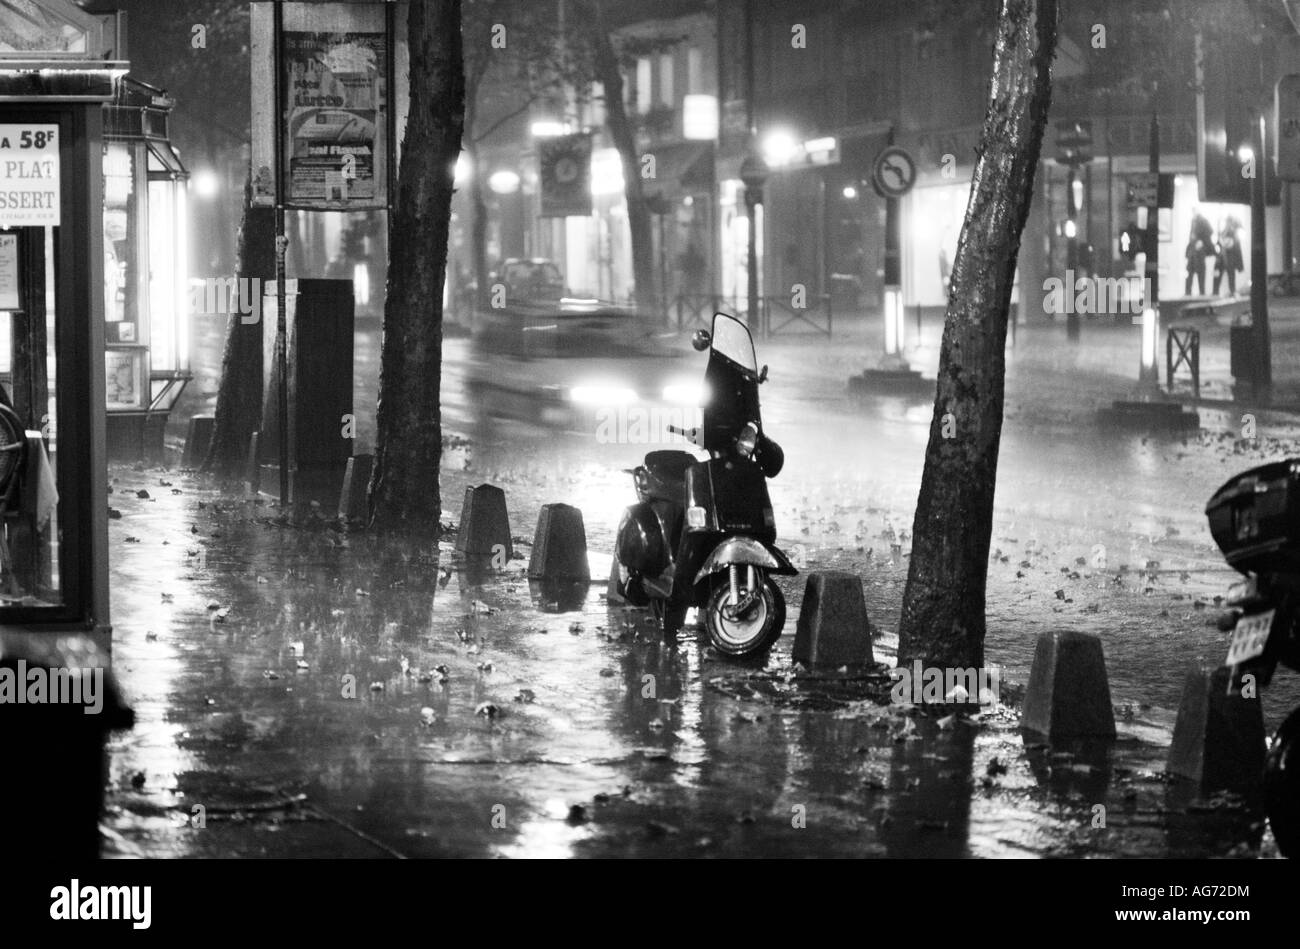 A scooter parked on a pavement on Boulevard Saint Michel in Paris during a rainstorm at night Stock Photo